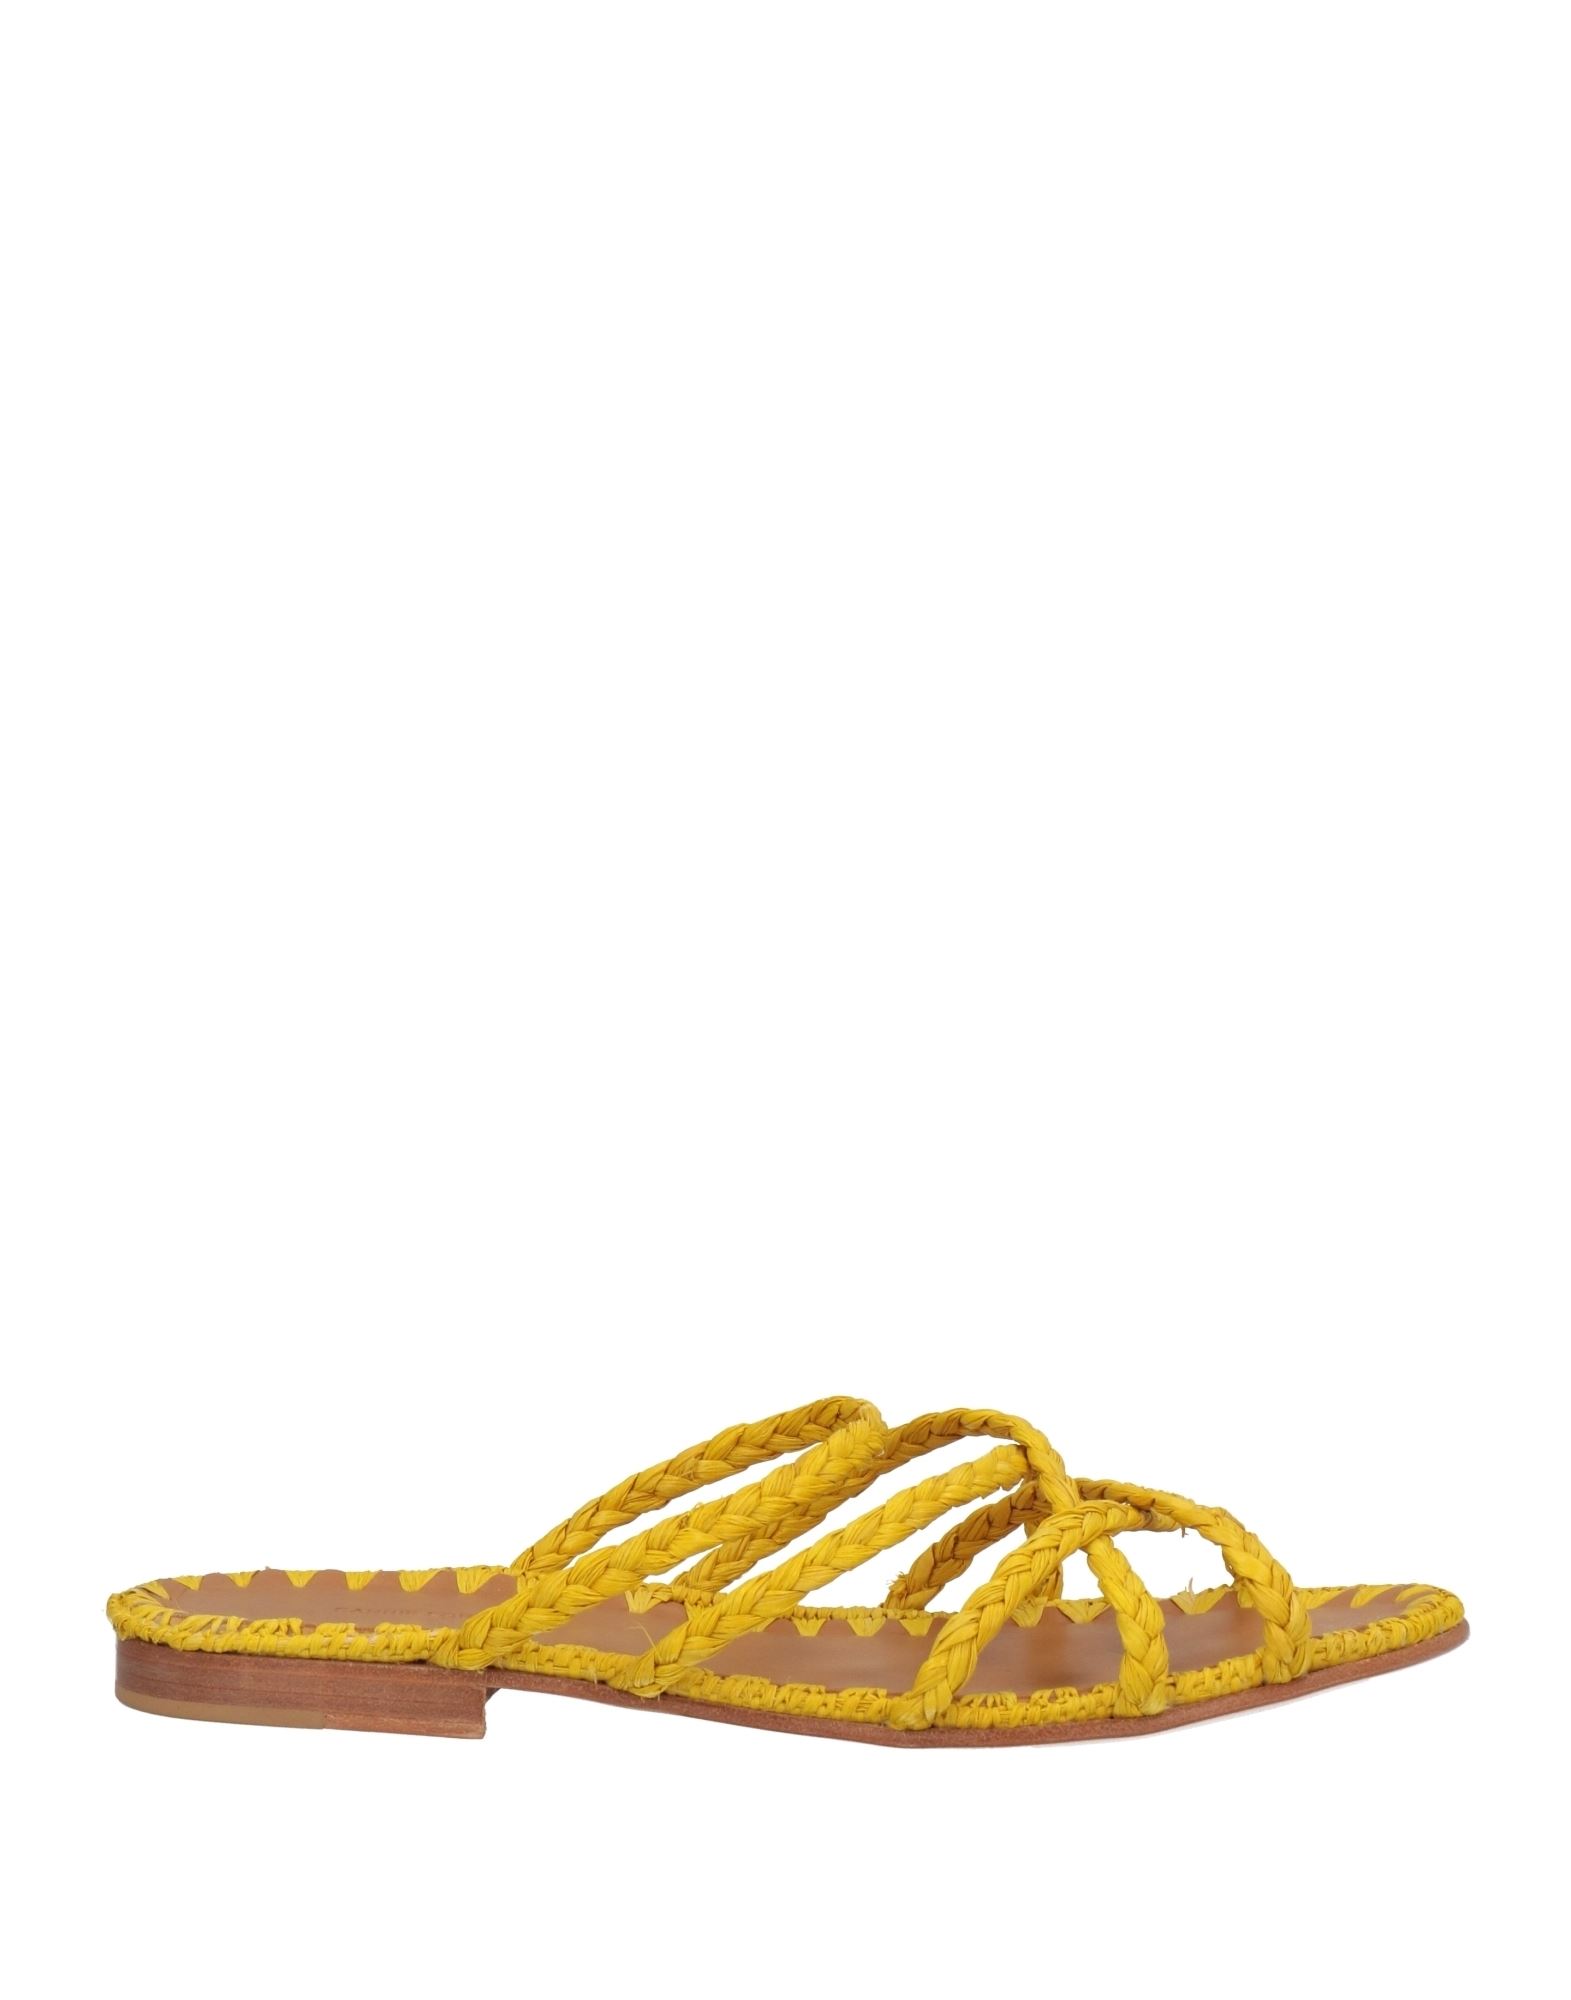 Carrie Forbes Sandals In Yellow